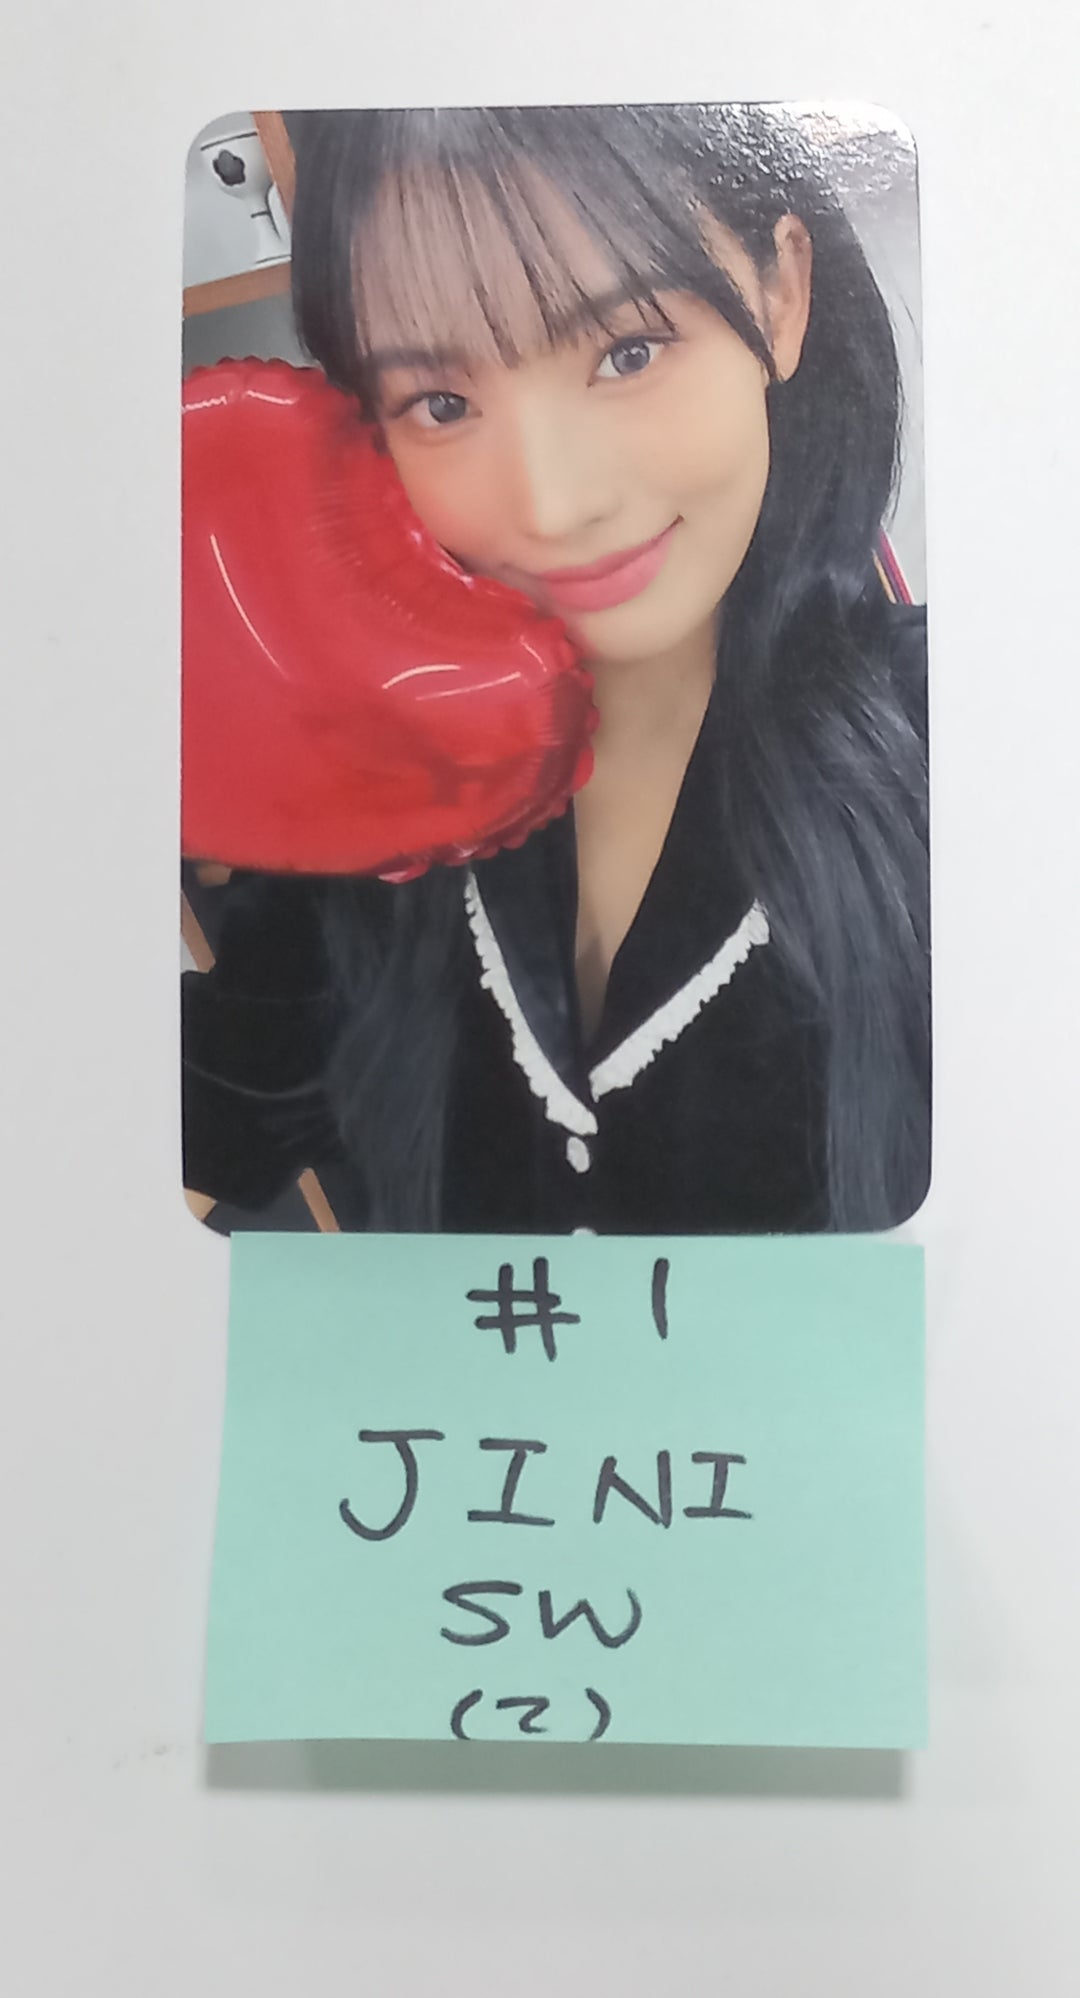 JINI "An Iron Hand In A Velvet Glove" - Soundwave Fansign Event Photocard [23.10.18]